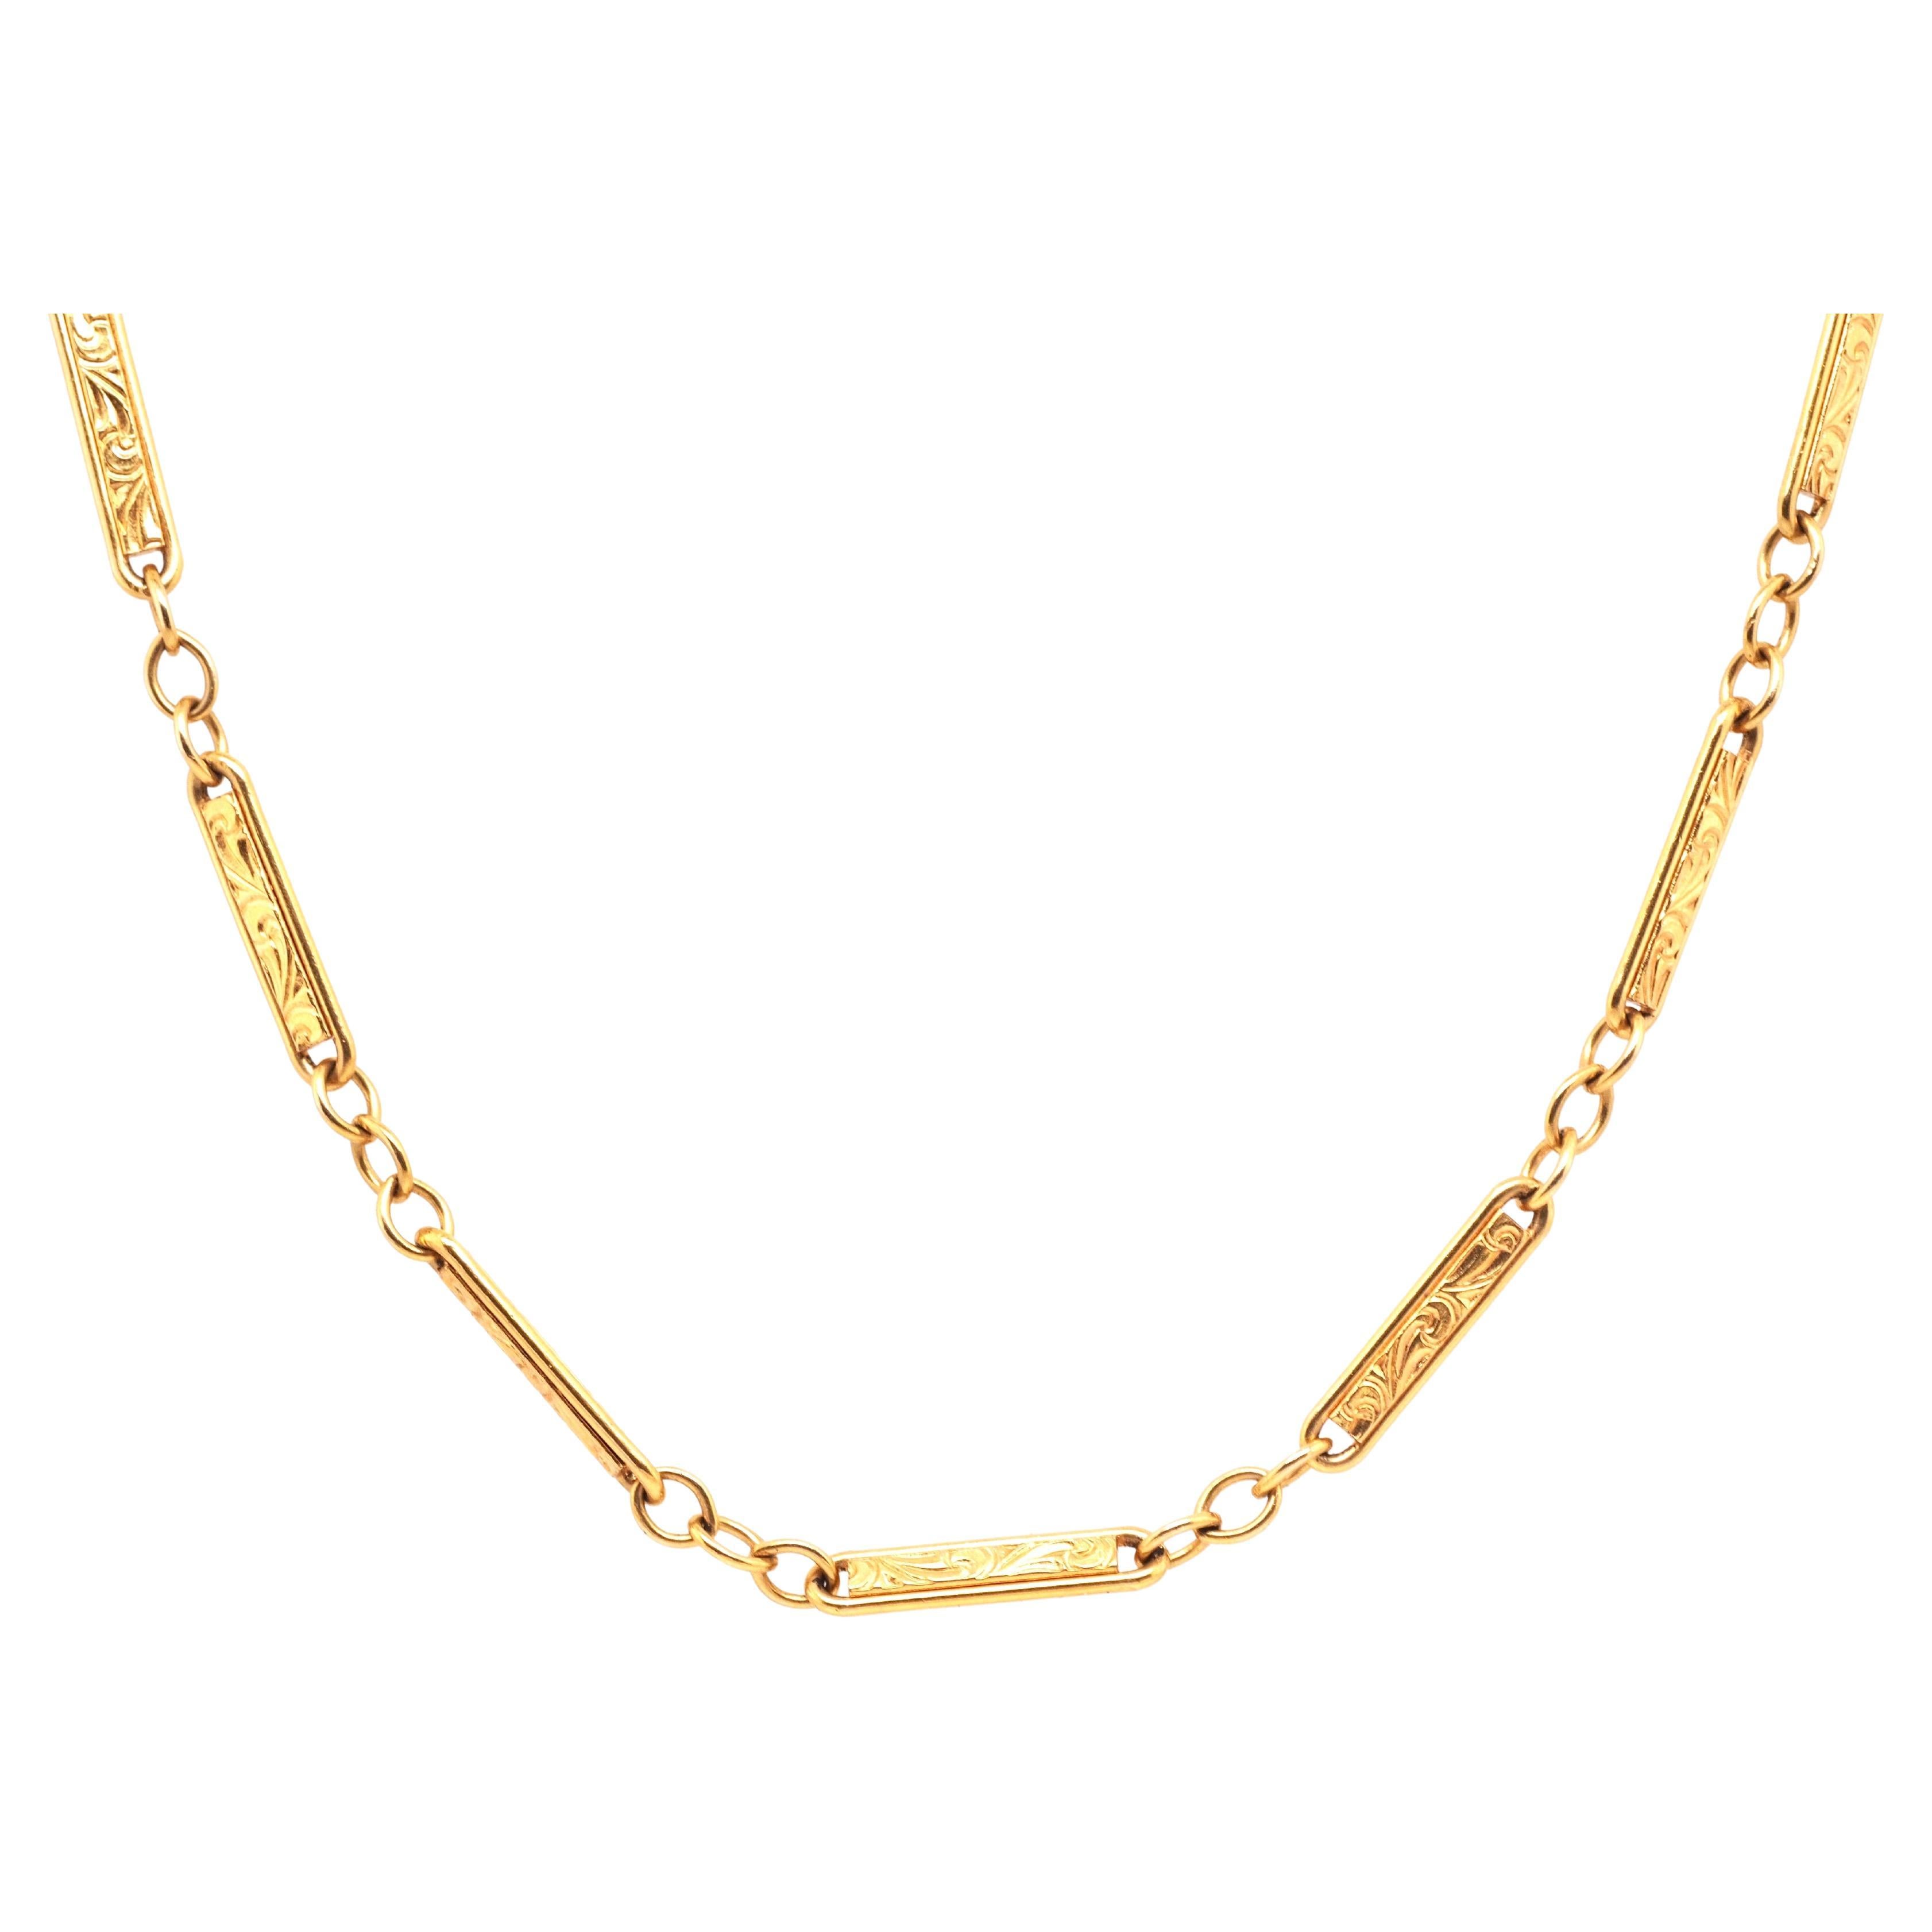 Circa 1910s Edwardian 14K Yellow Gold 26.5 Inch Engraved Link Necklace Chain